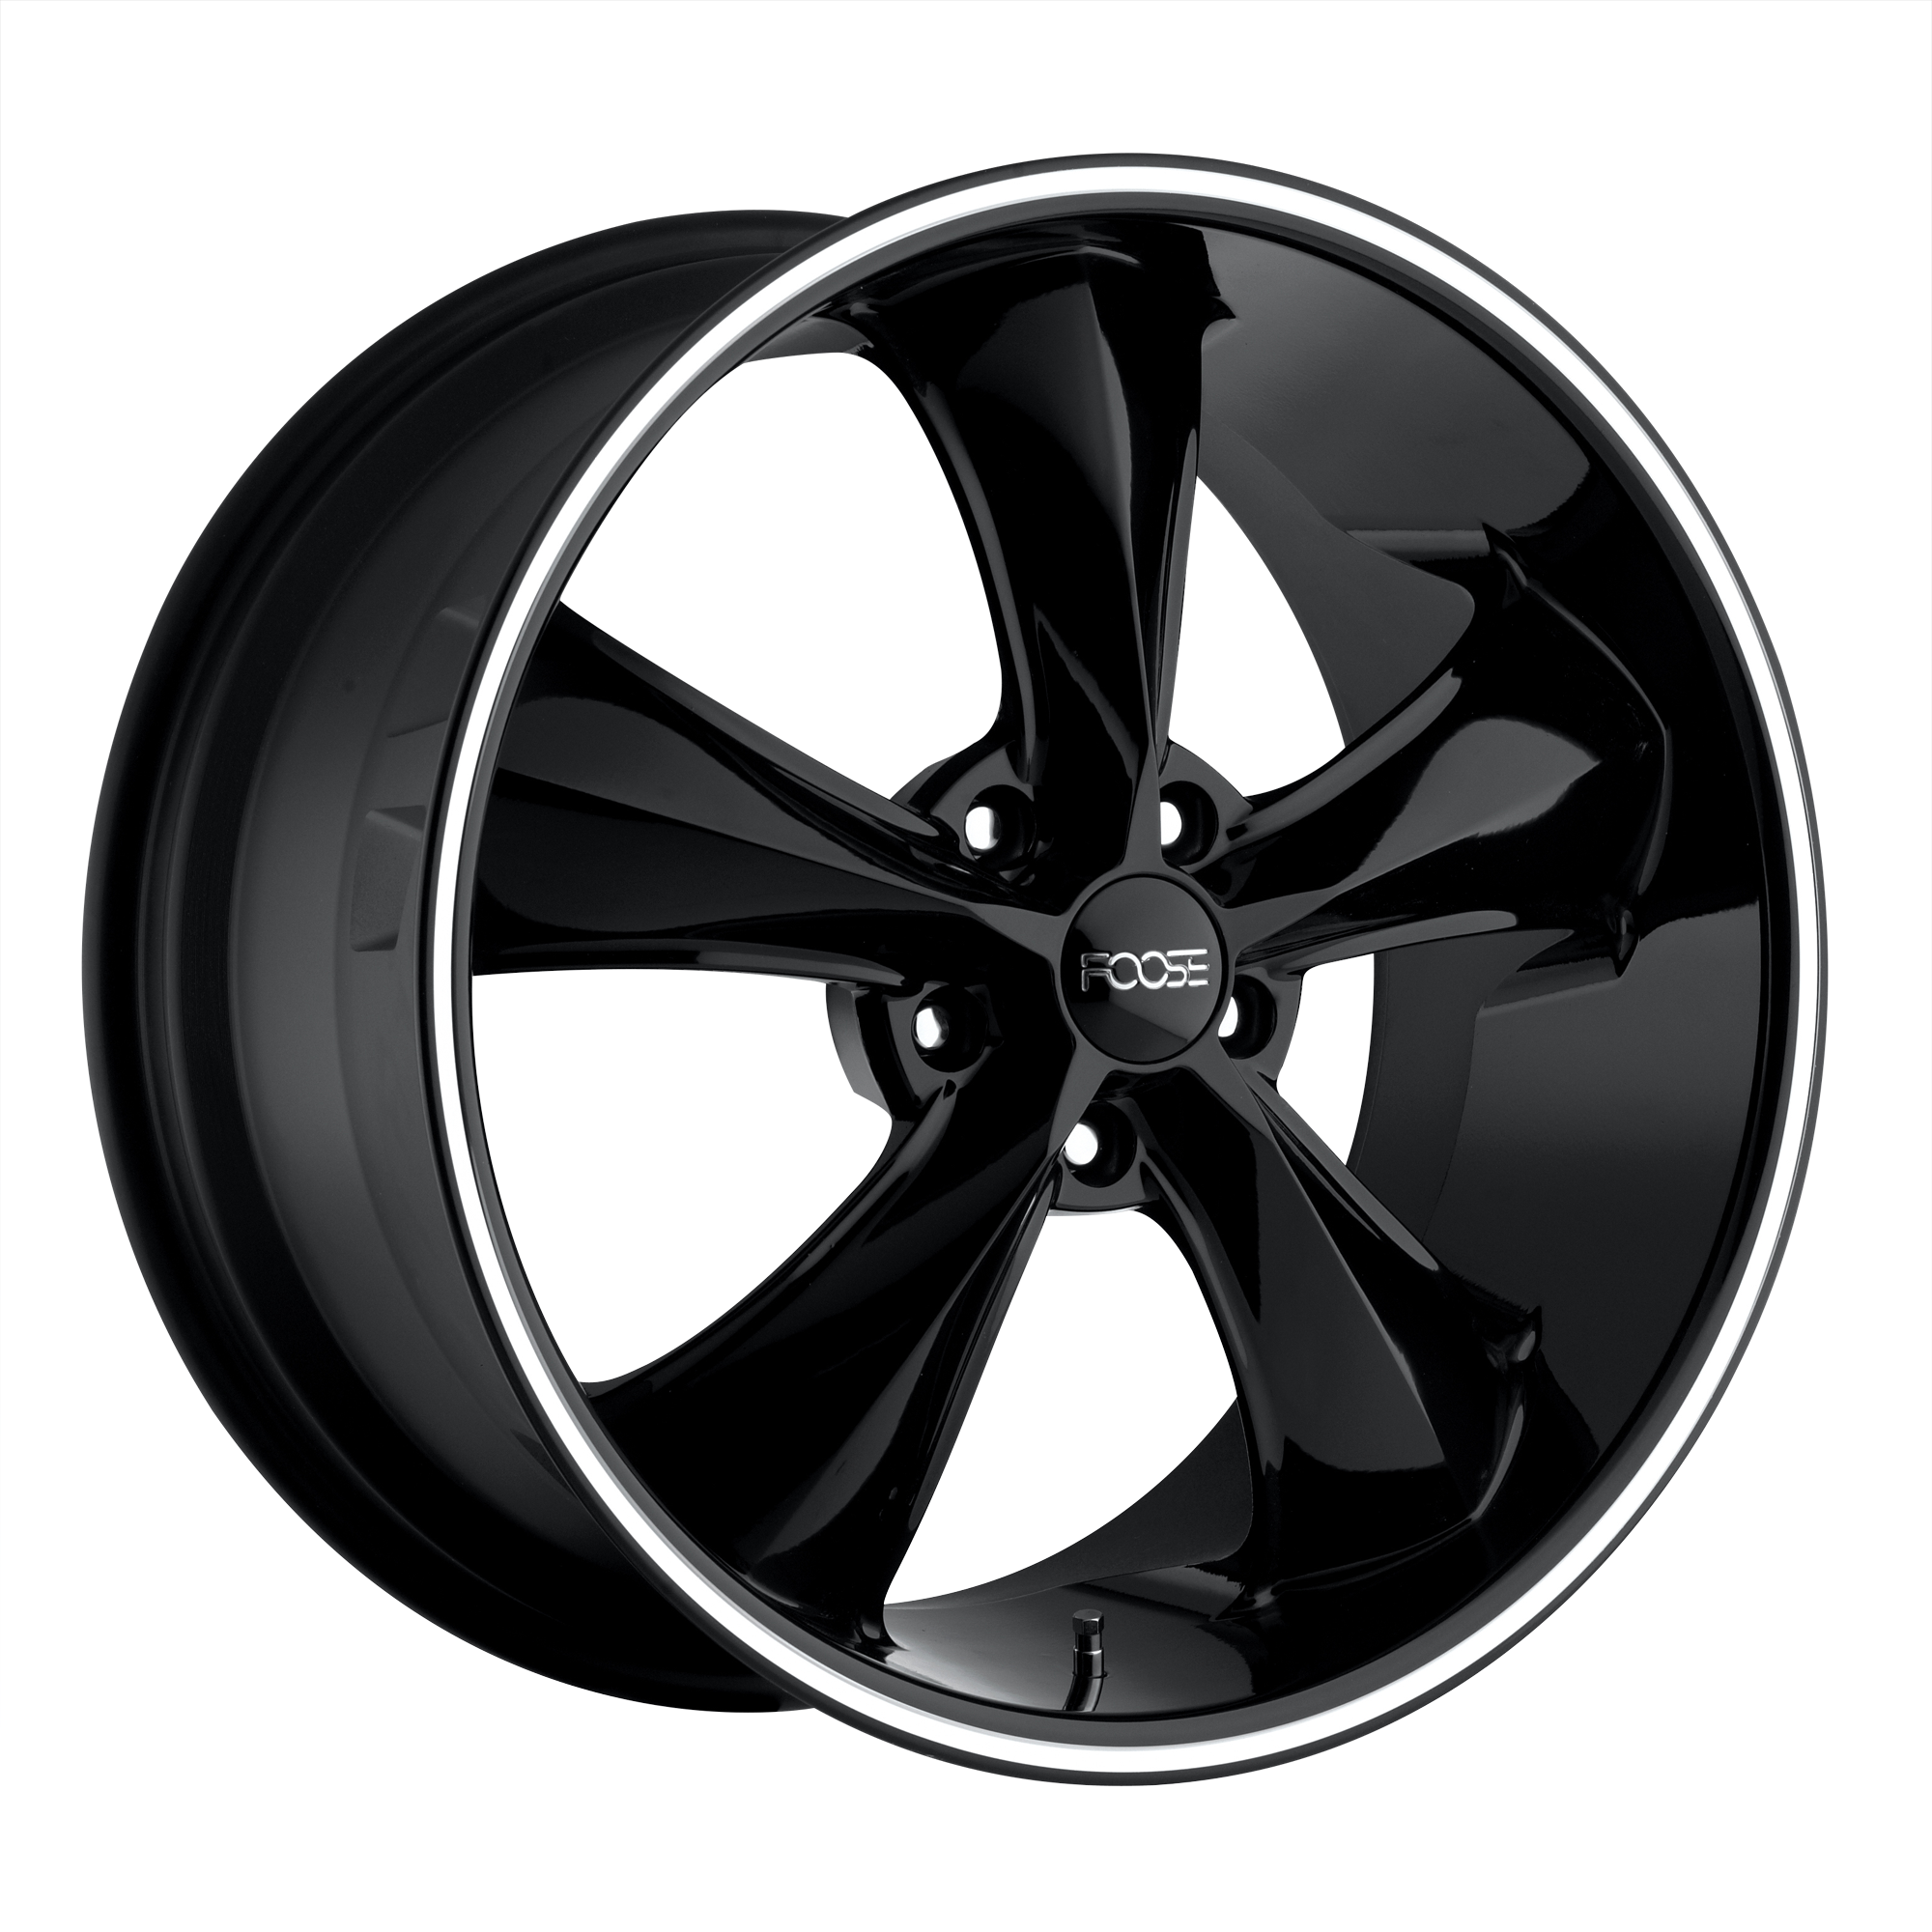 LEGEND 18x8.5 5x120.00 GLOSS BLACK MILLED (34 mm) - Tires and Engine Performance